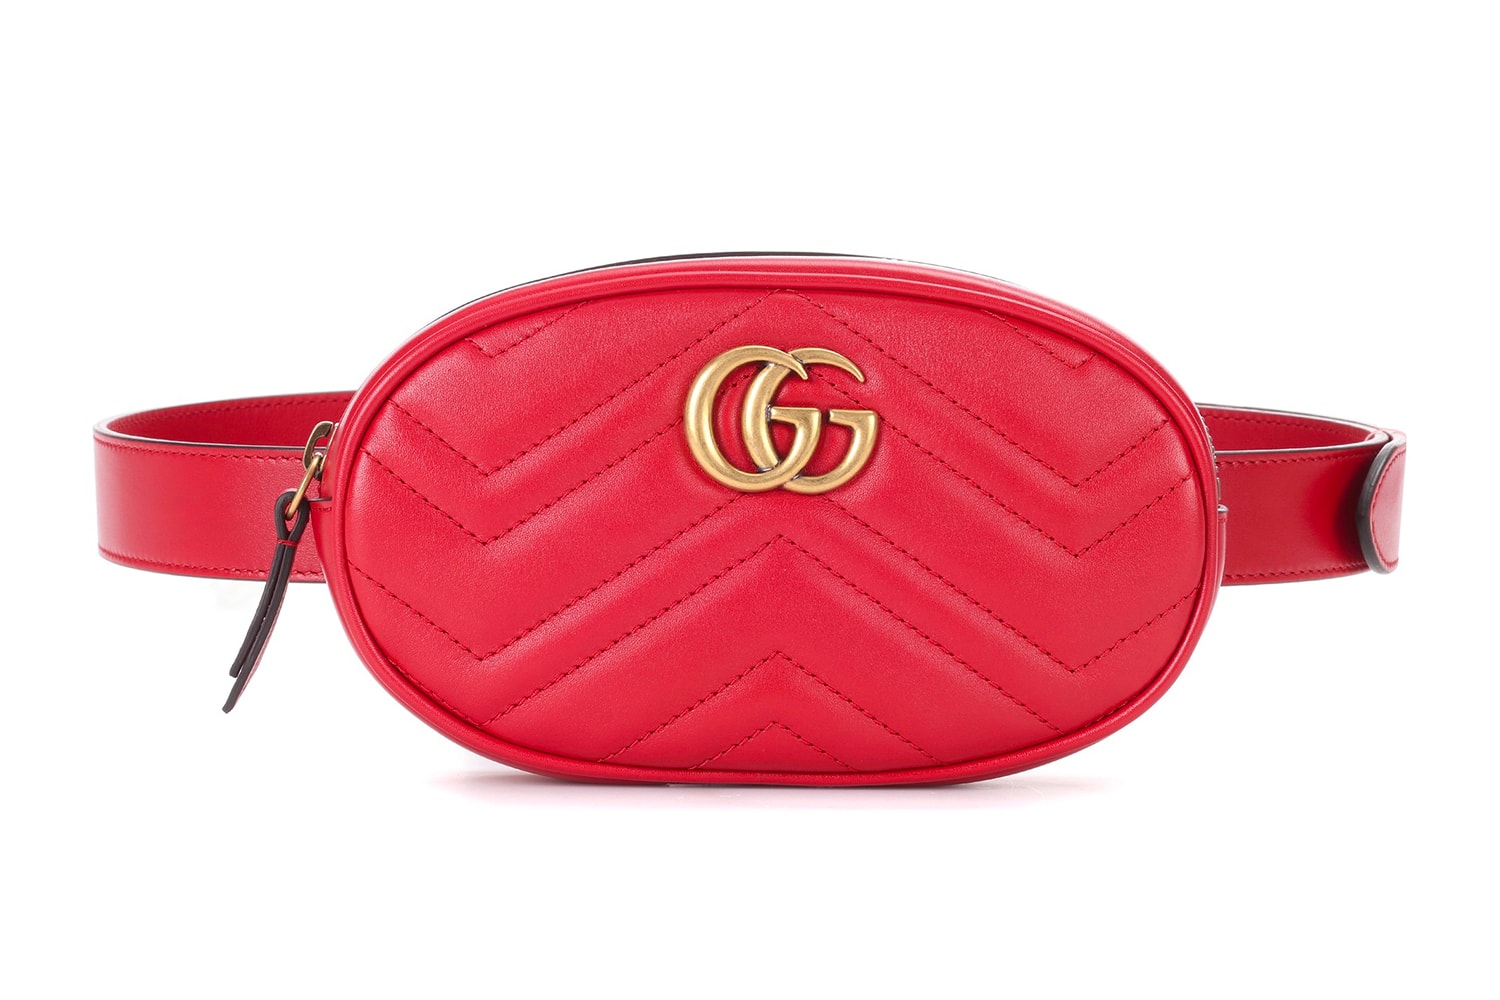 Gucci GG Marmont Leather Belt Bag Red Alessandro Michele Fanny Pack